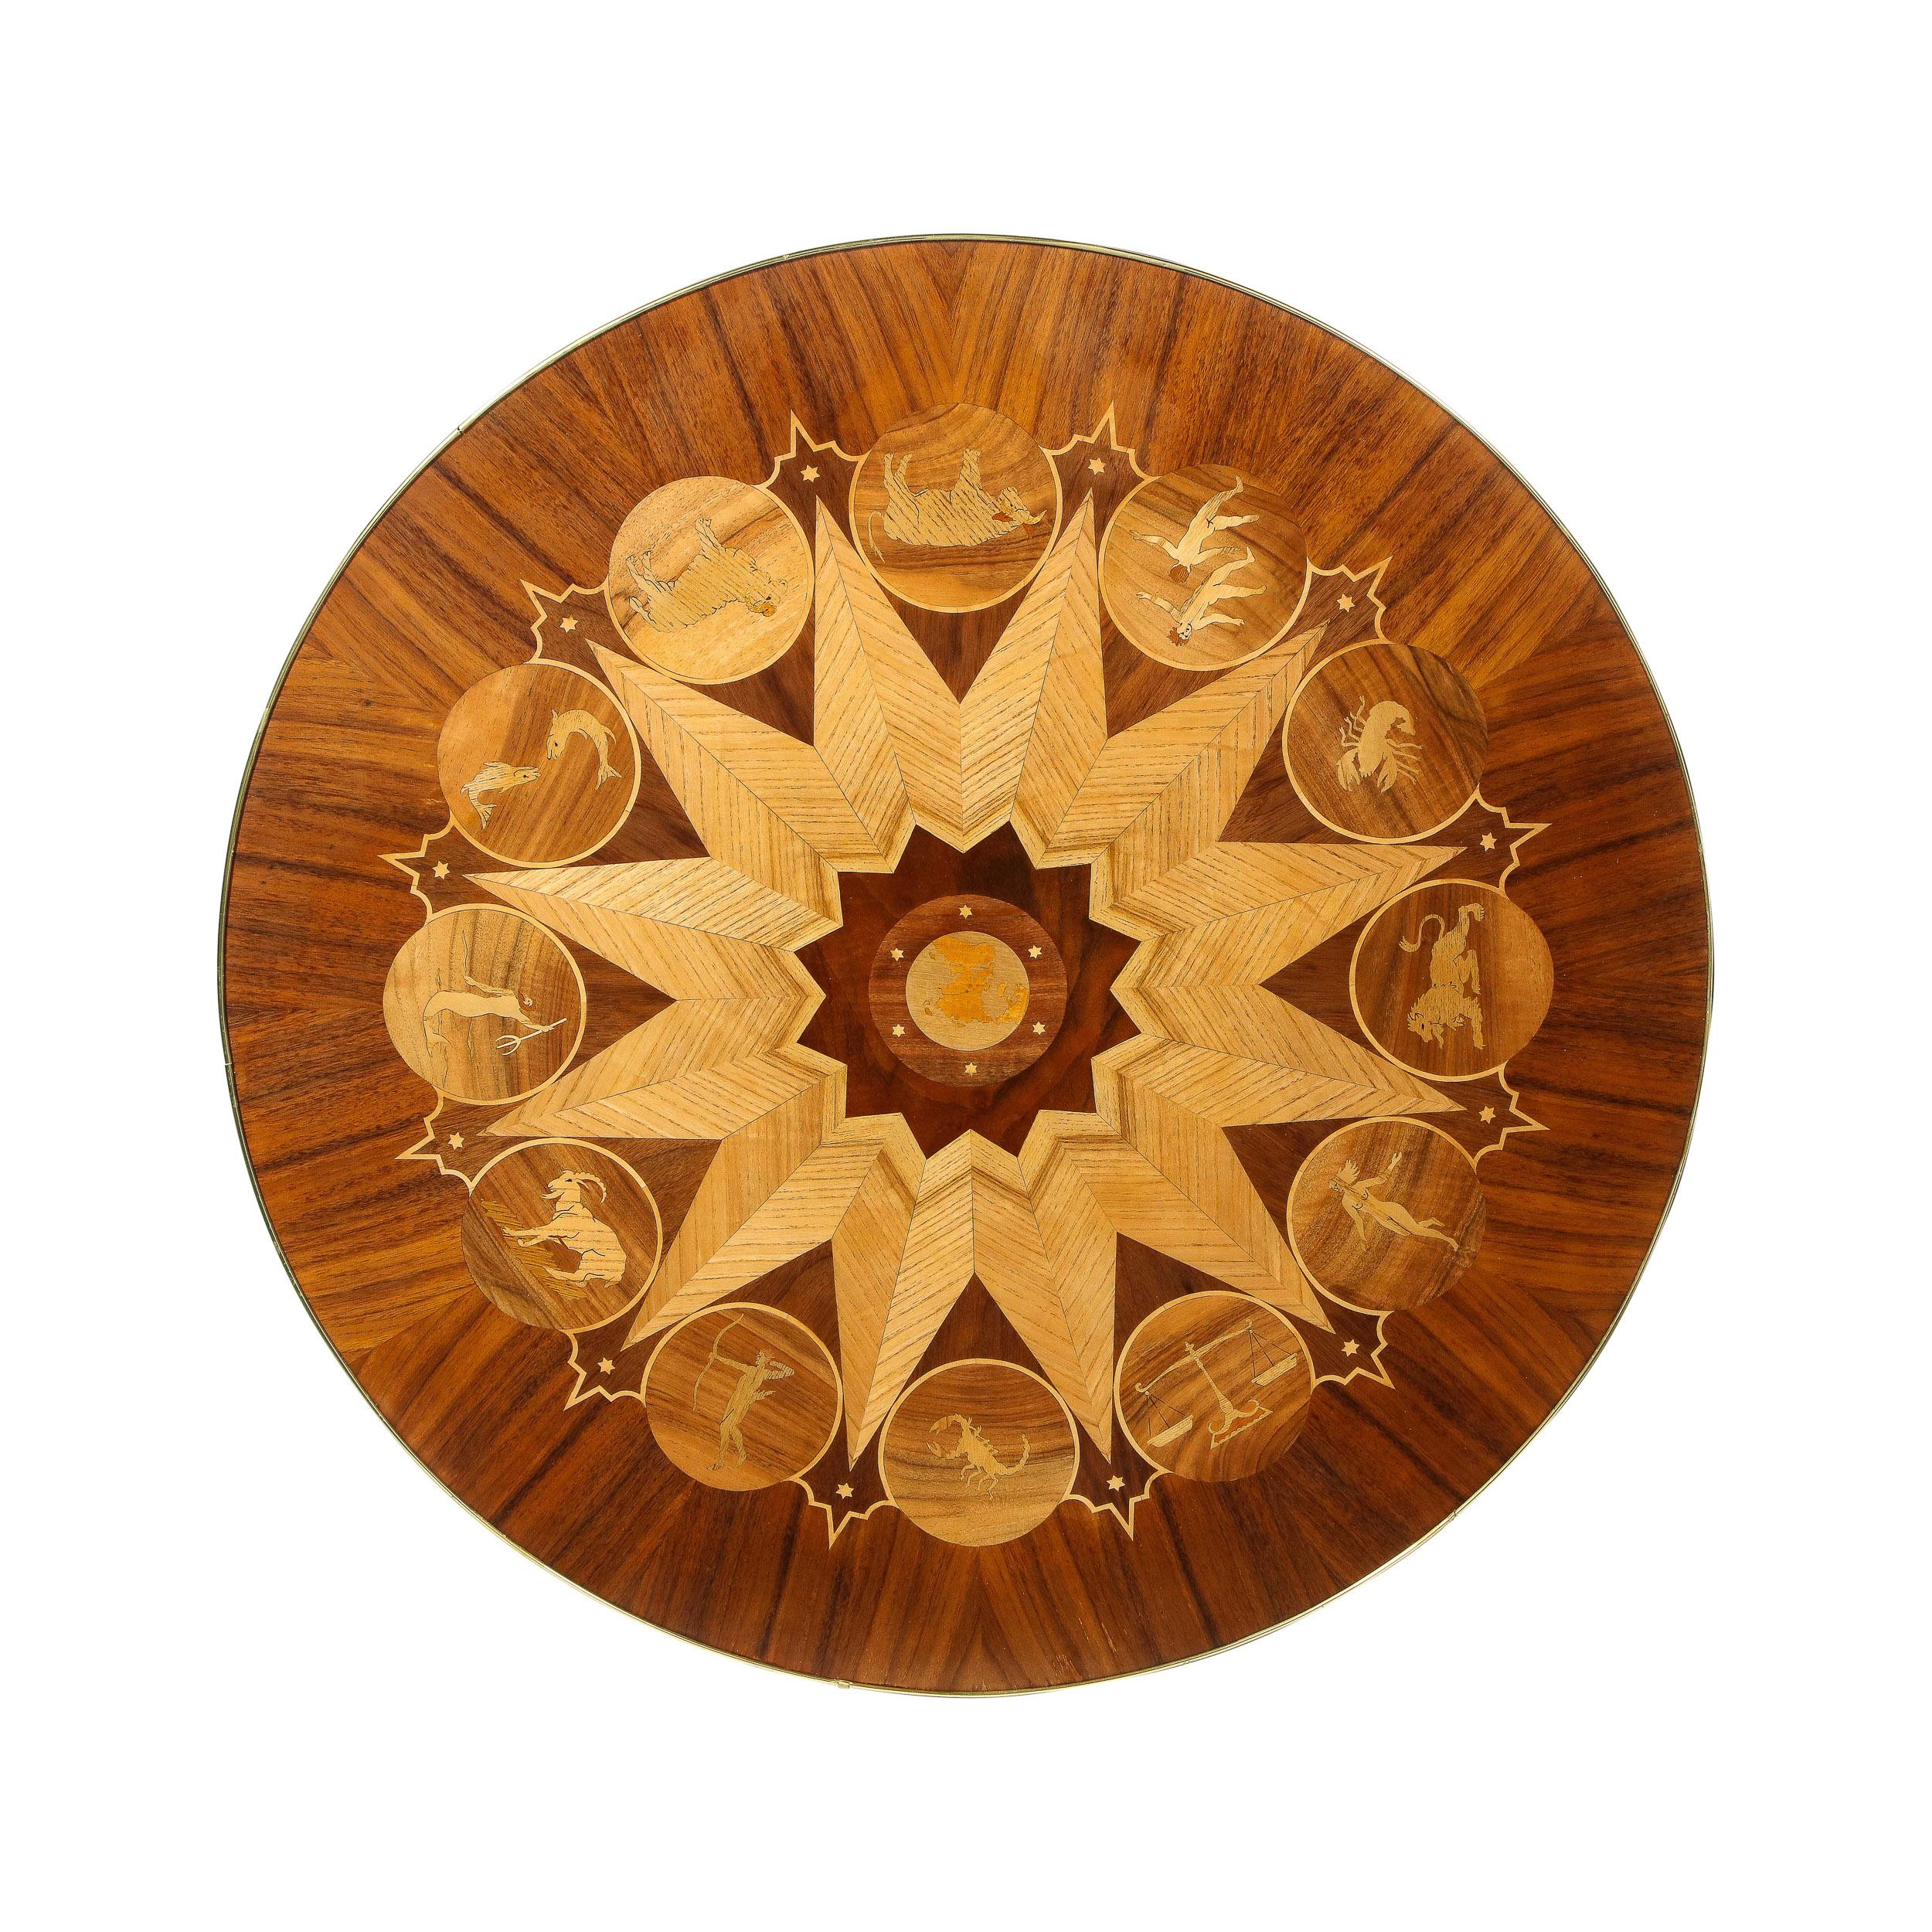 Italian Midcentury Bookmatched Walnut & Elm Cocktail Table with Zodiac Themed Marquetry